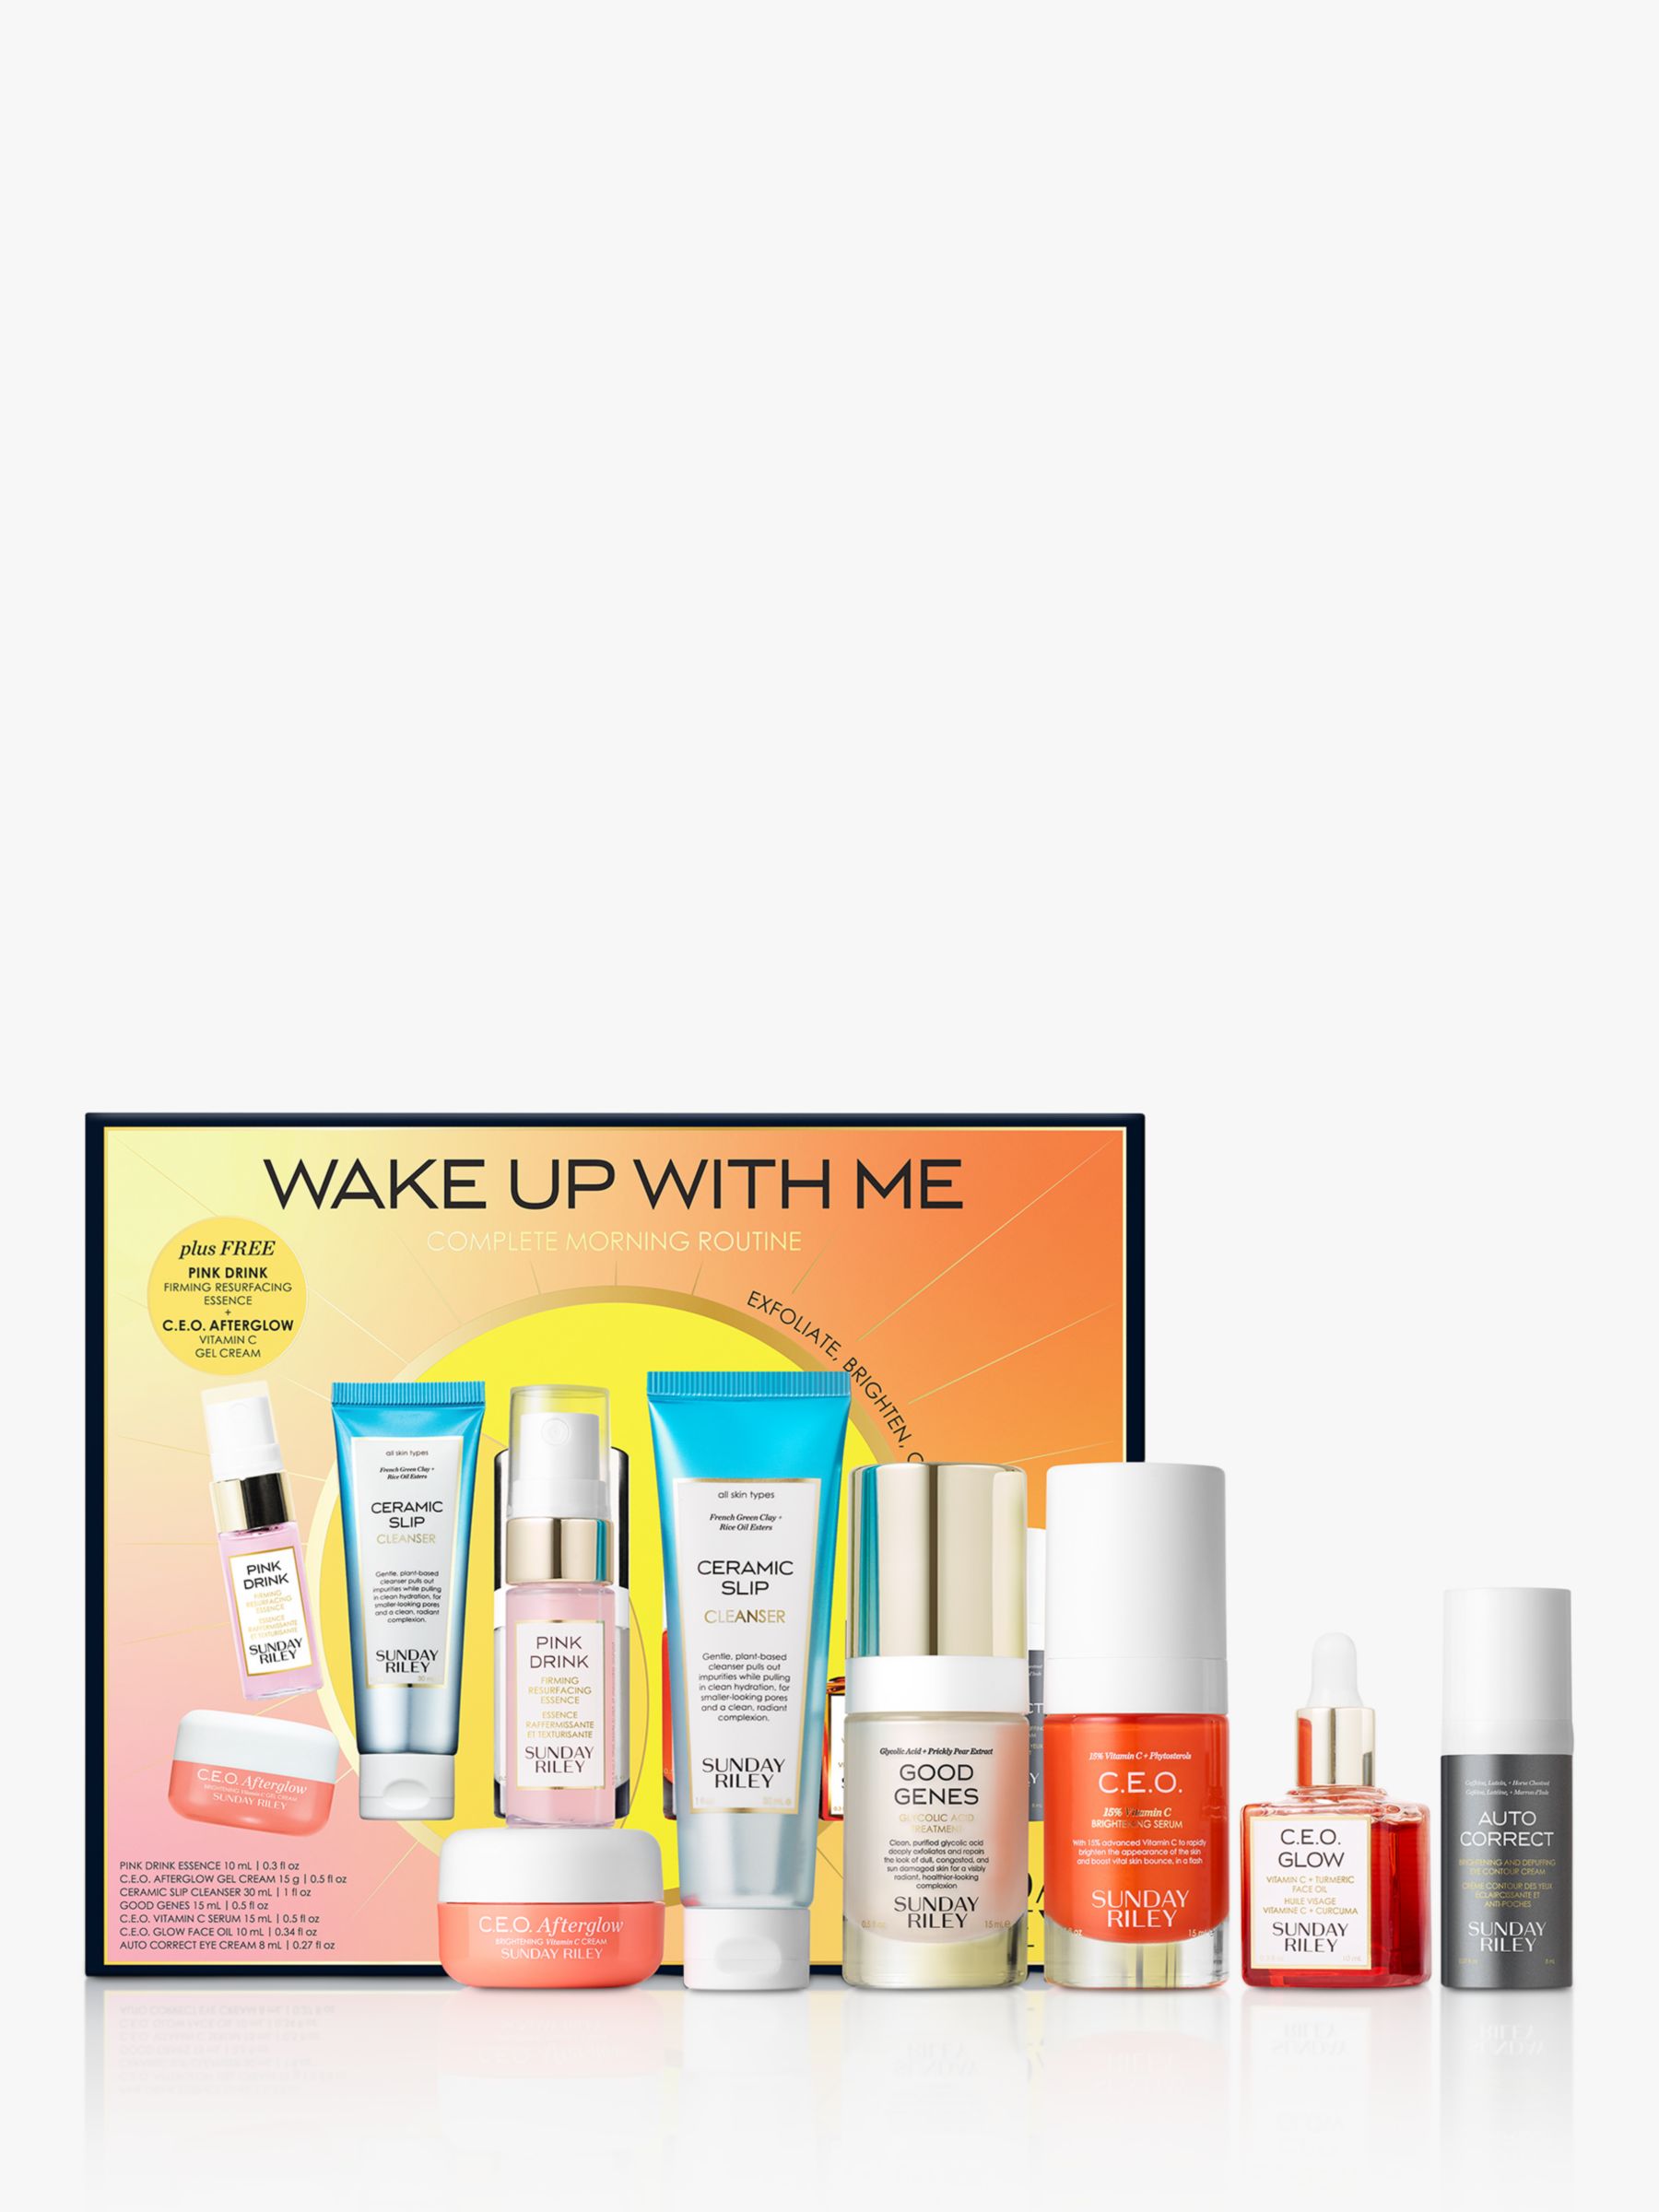 Sunday Riley Wake Up With Me Complete Morning Routine Skincare Gift Set 2